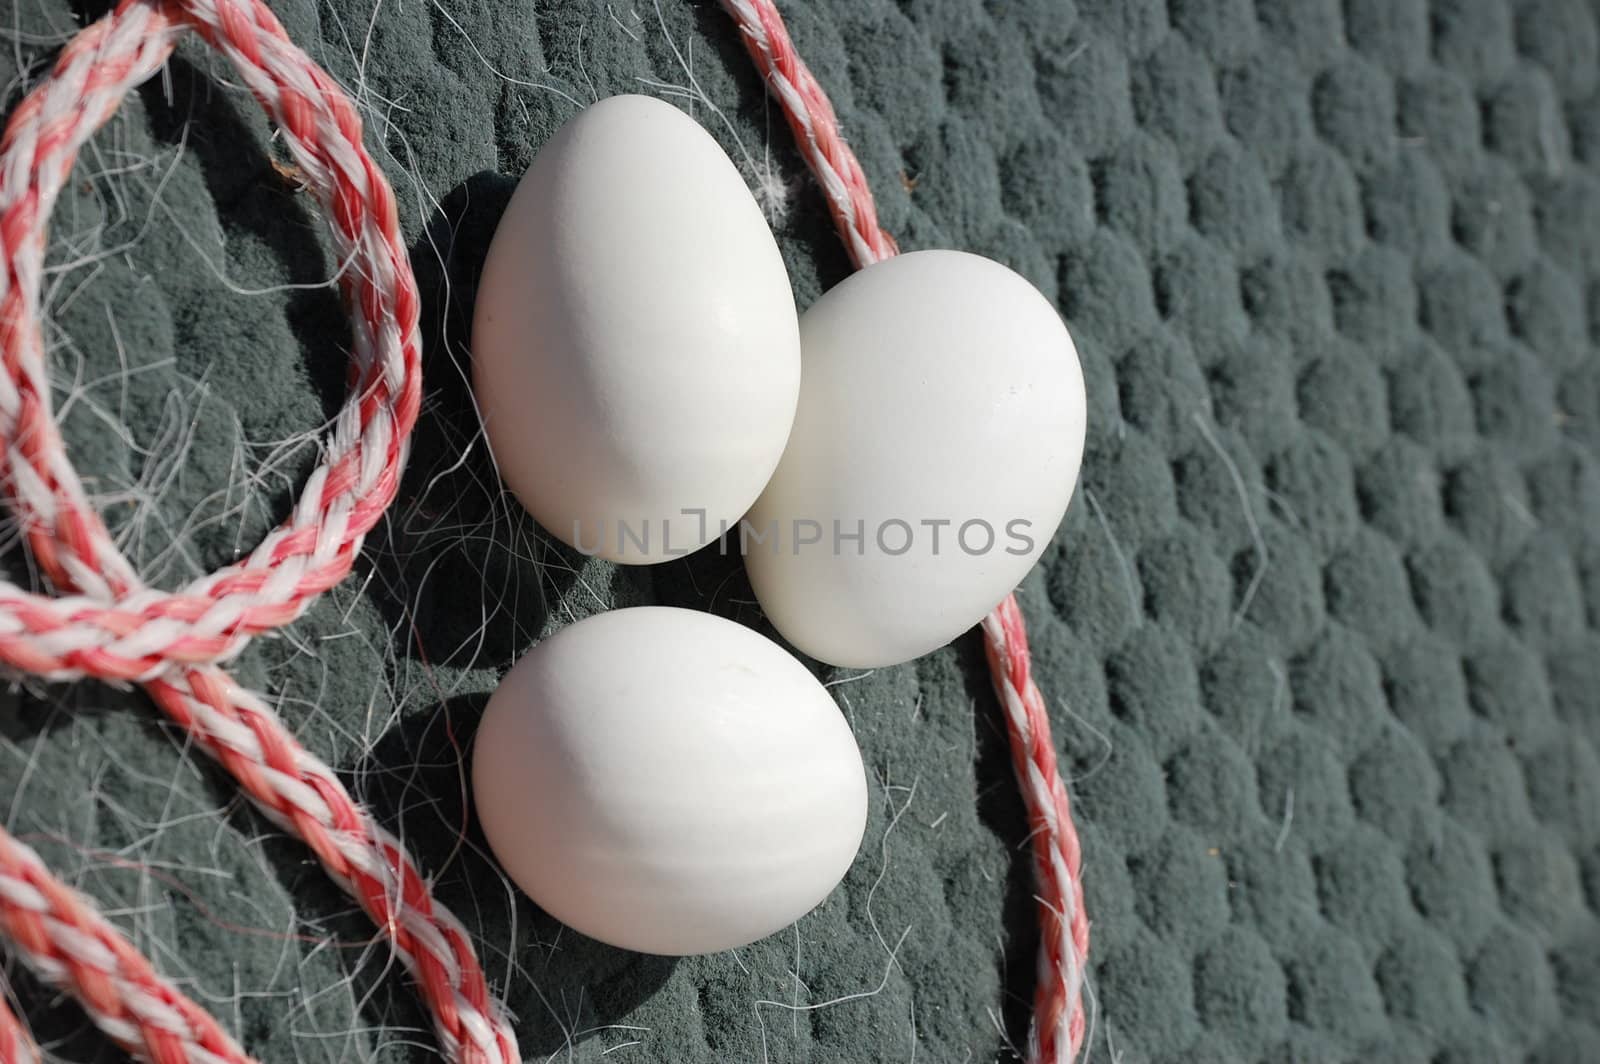 Three eggs on a boat by RefocusPhoto